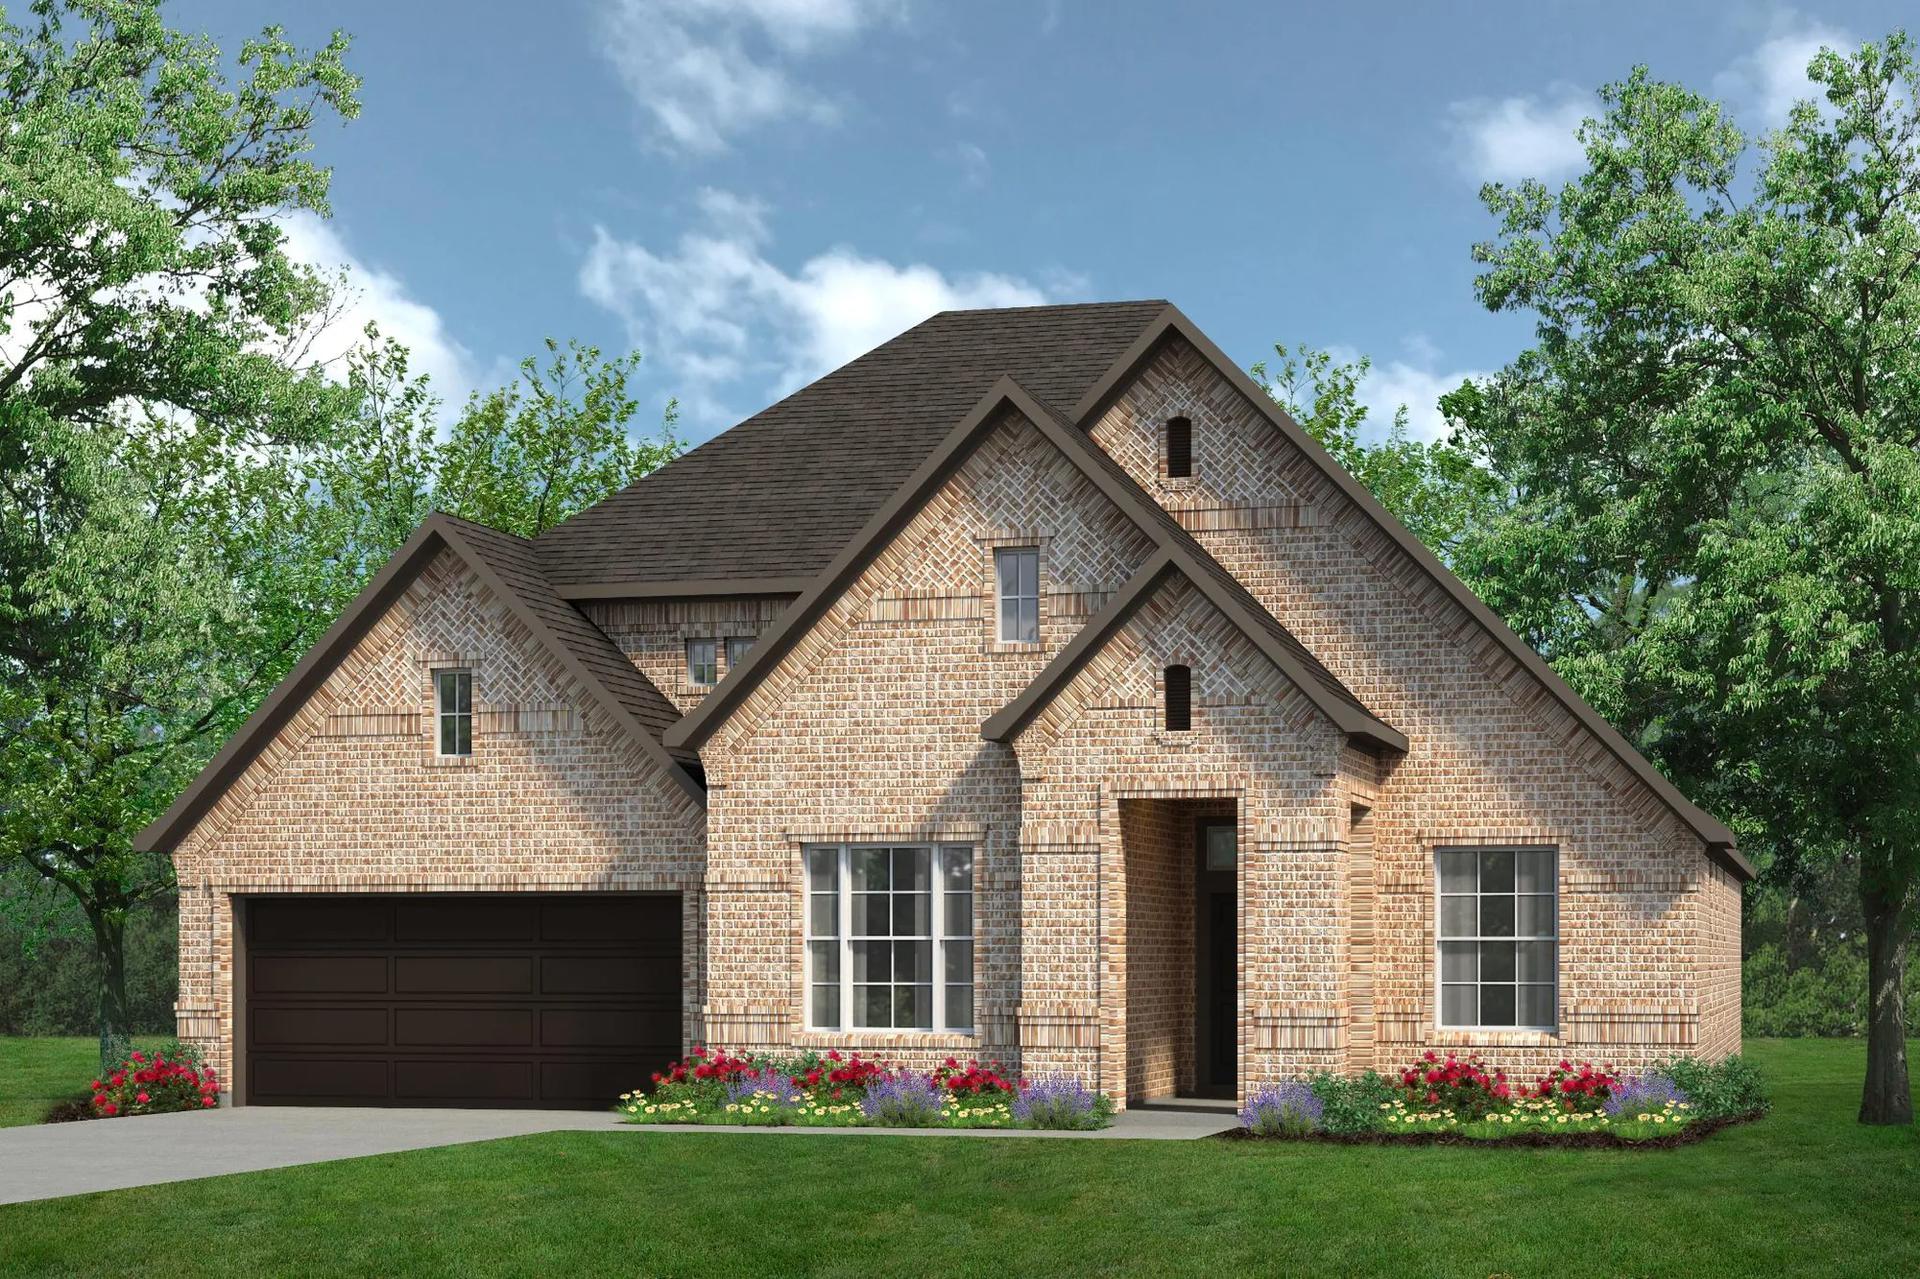 2434 C. Concept 2434 New Home in Waxahachie, TX